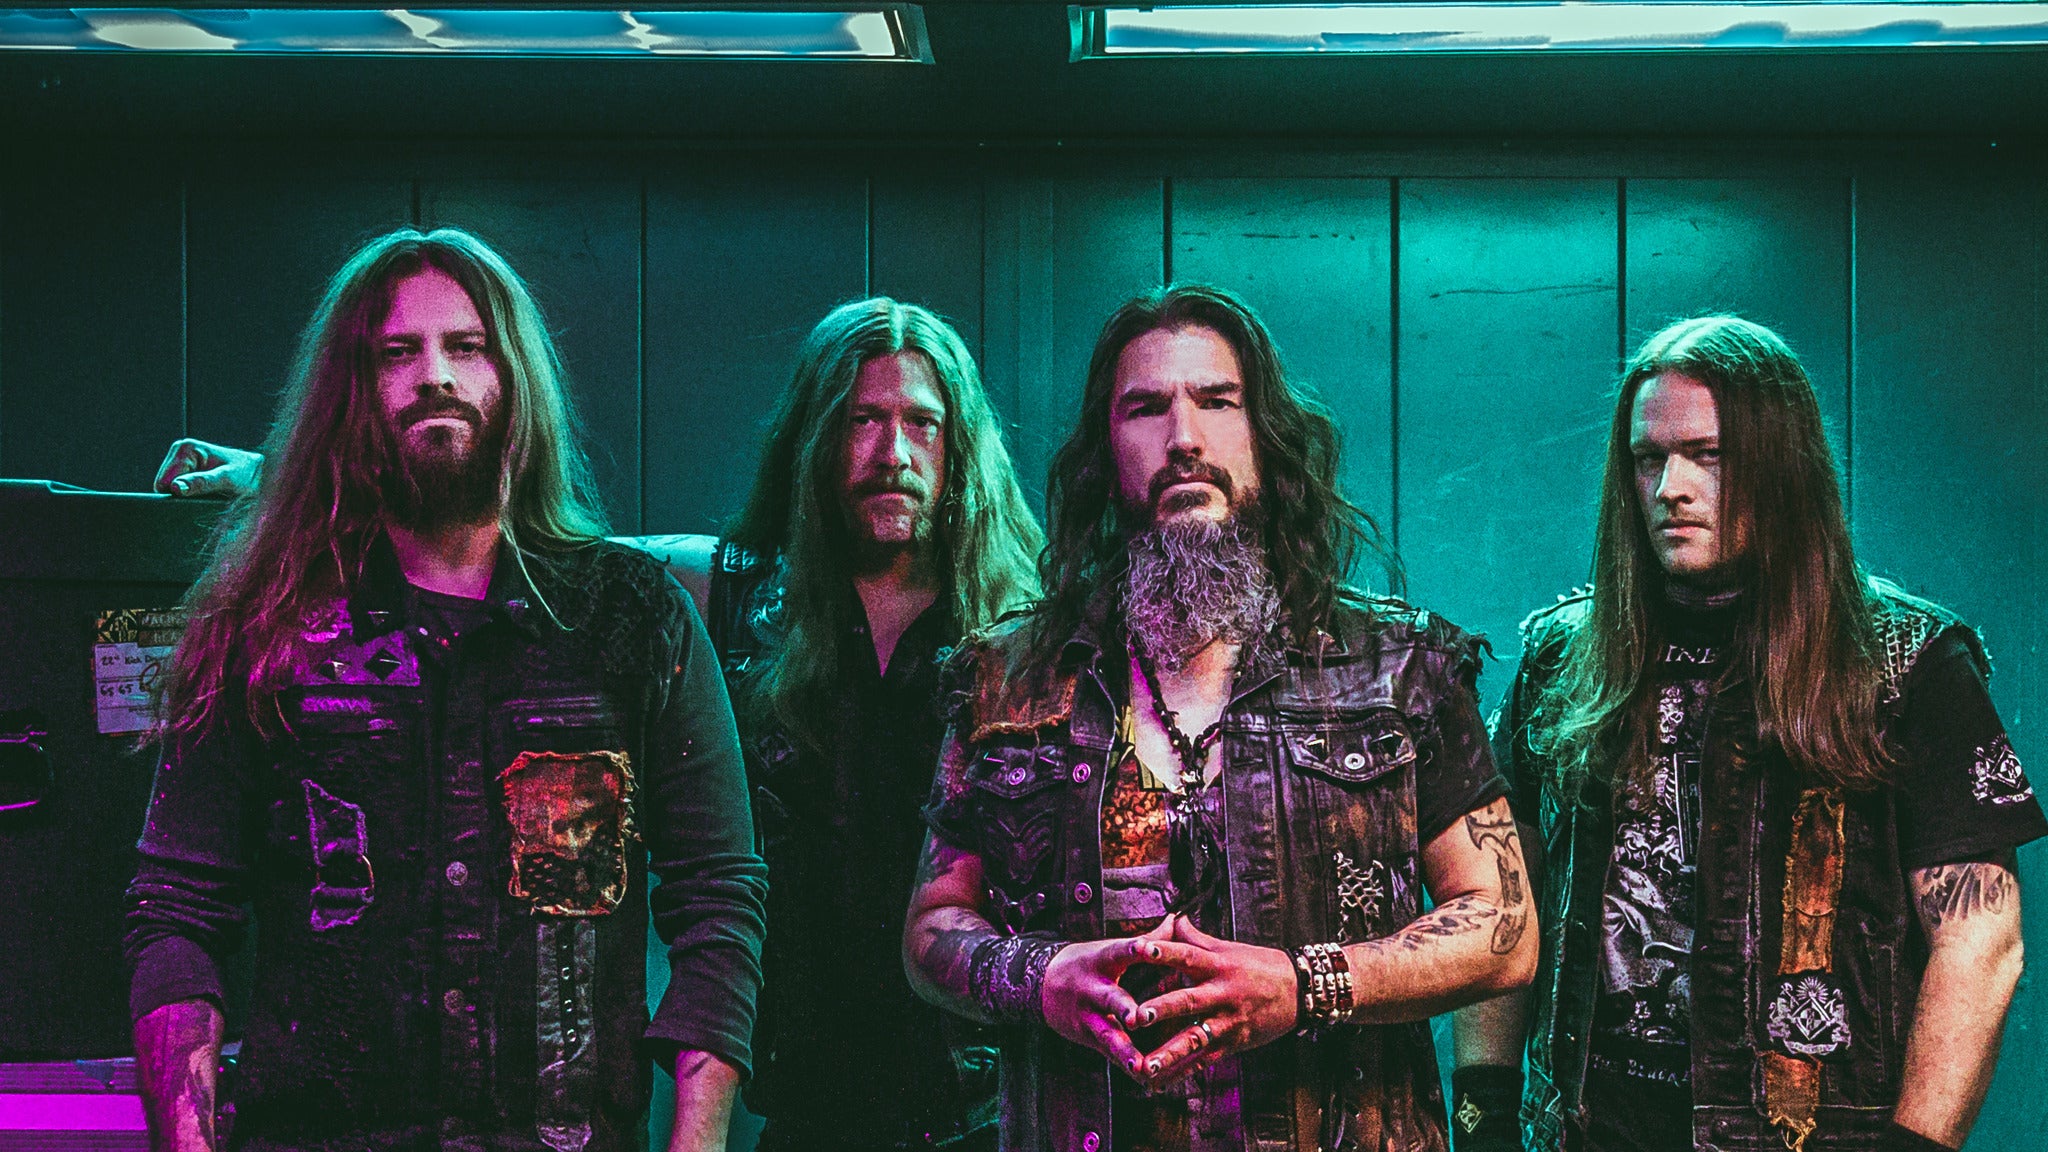 Image used with permission from Ticketmaster | Machine Head & Amon Amarth: THE VIKINGS & LIONHEARTS TOUR 2022 tickets